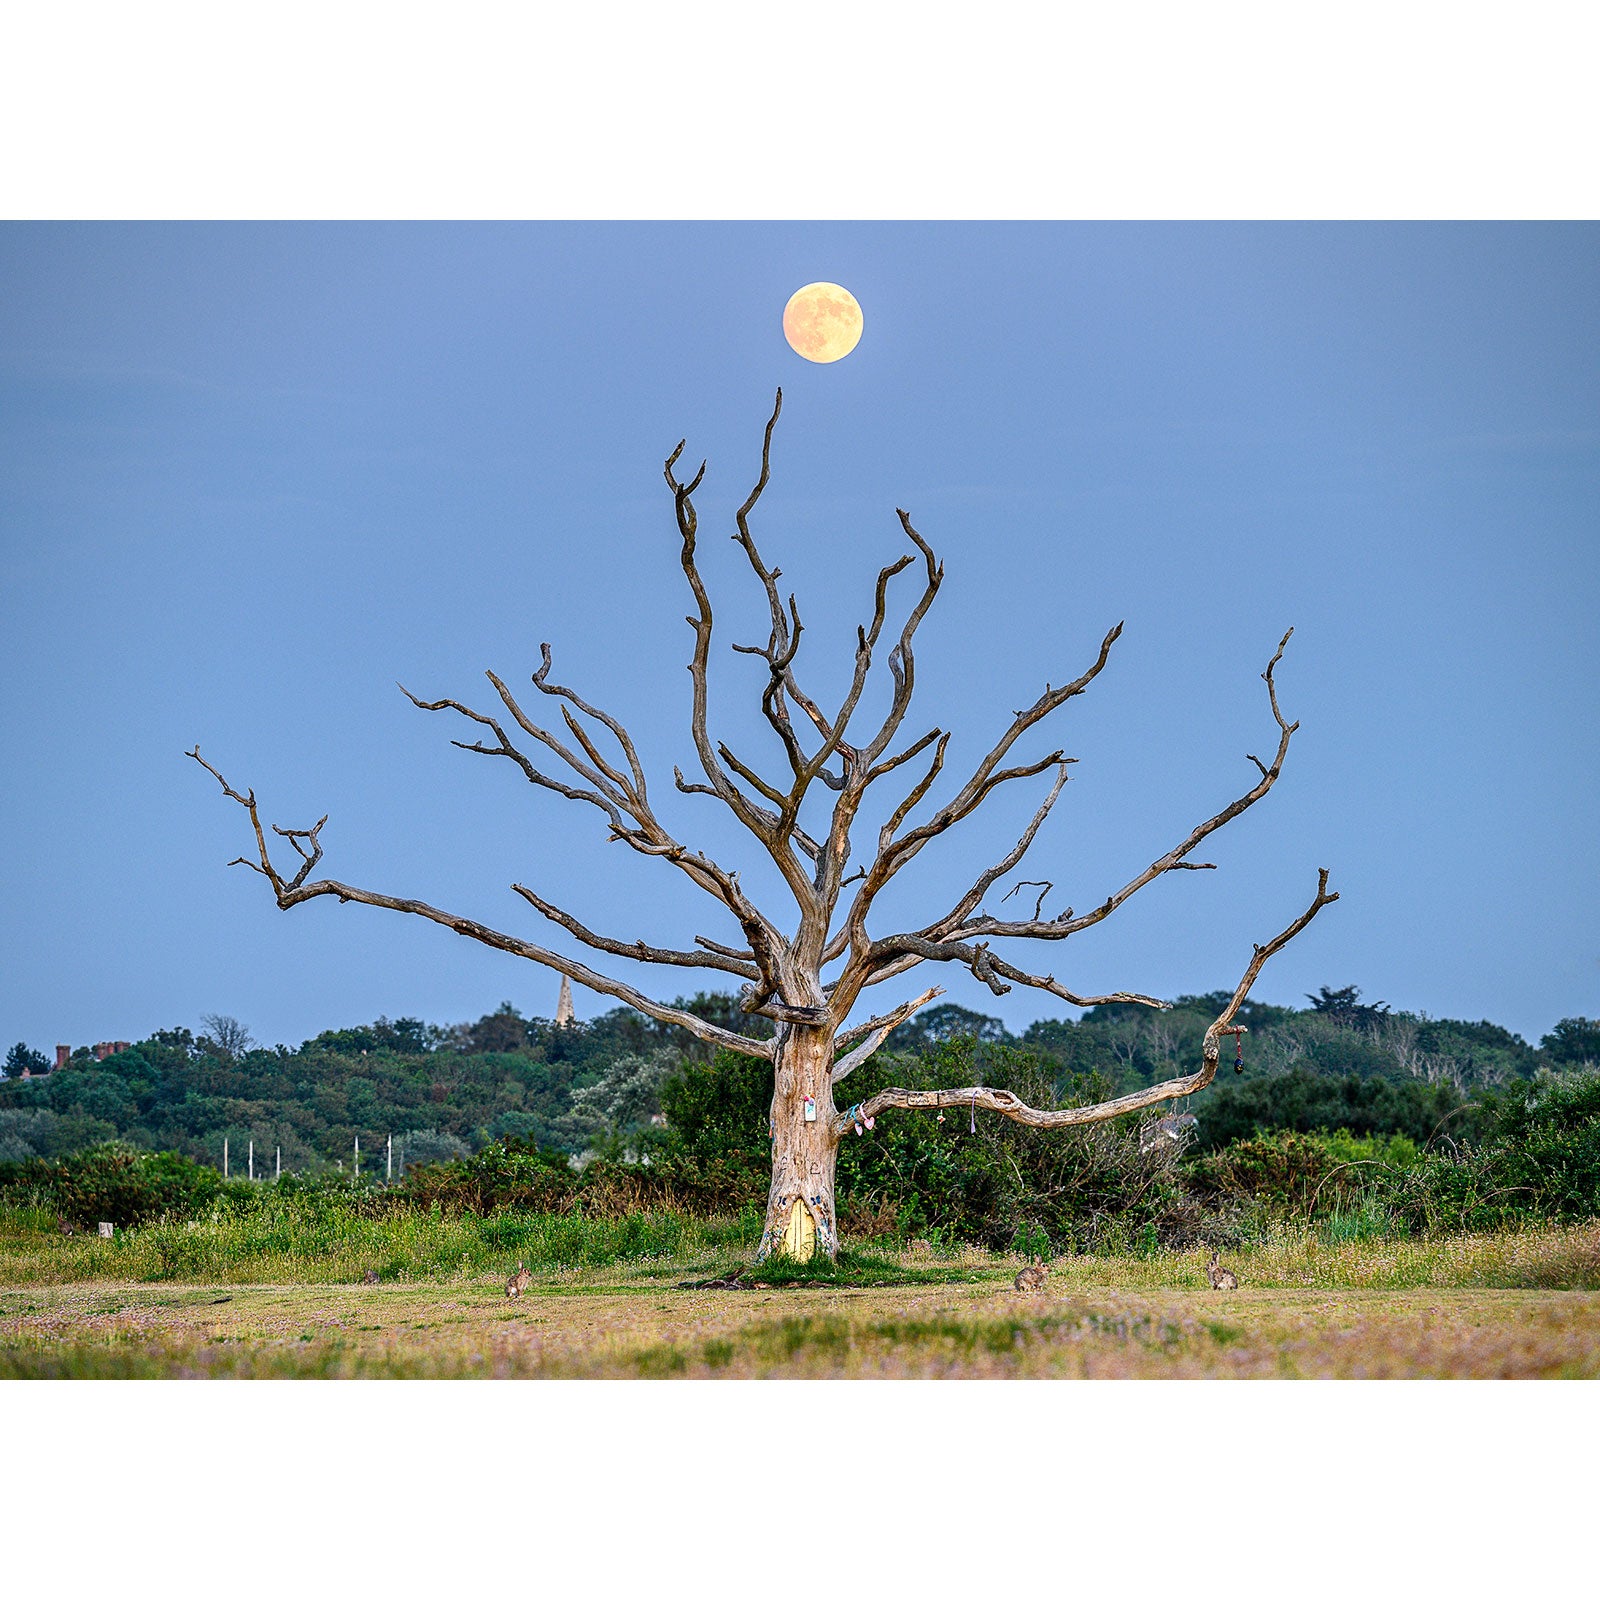 Full moon rising above The Fairy Tree at The Duver in an open field on Gascoigne Isle, captured by Available Light Photography.